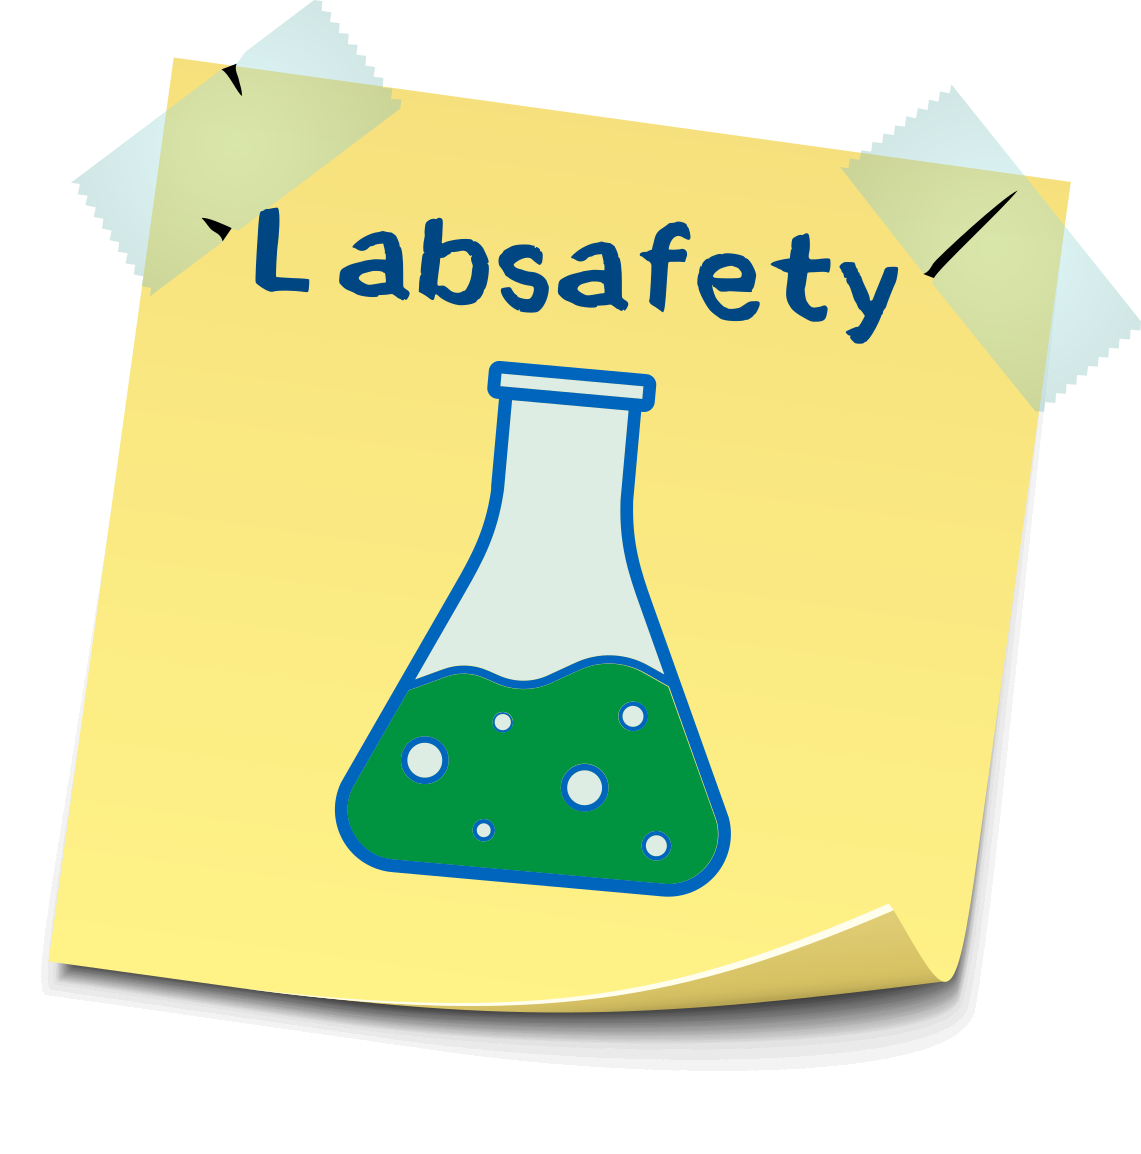 Muc16 Labsafety.png